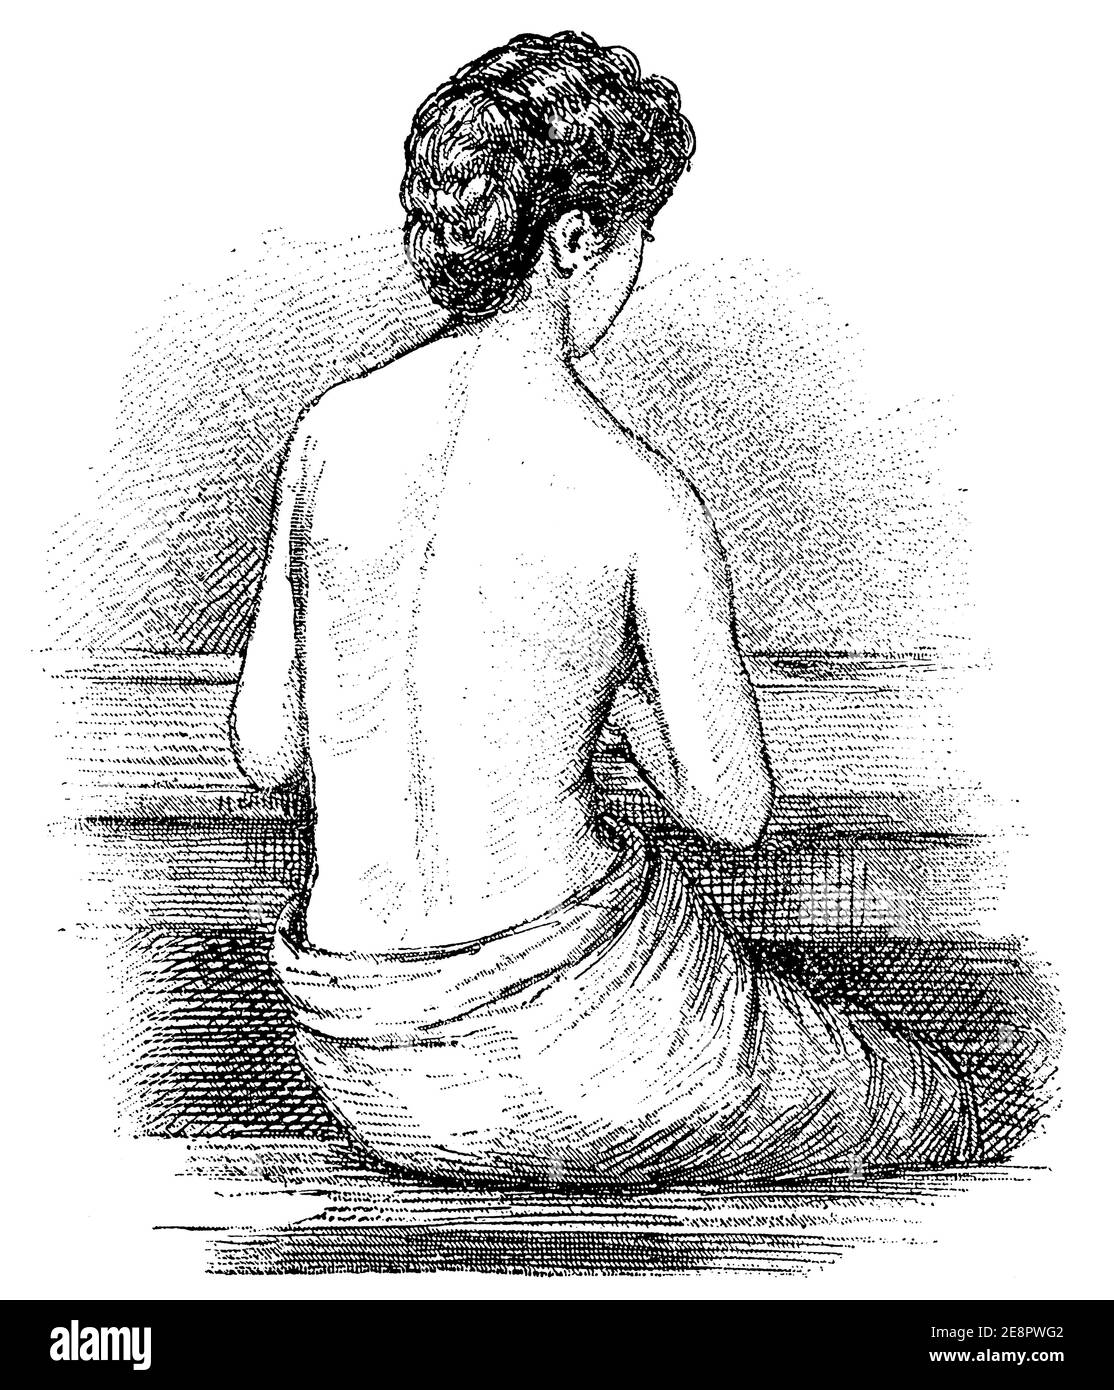 Elevation of the shoulder and curvature of the spine (scoliosis) due to poor posture at school. Illustration of the 19th century. Germany. White background. Stock Photo